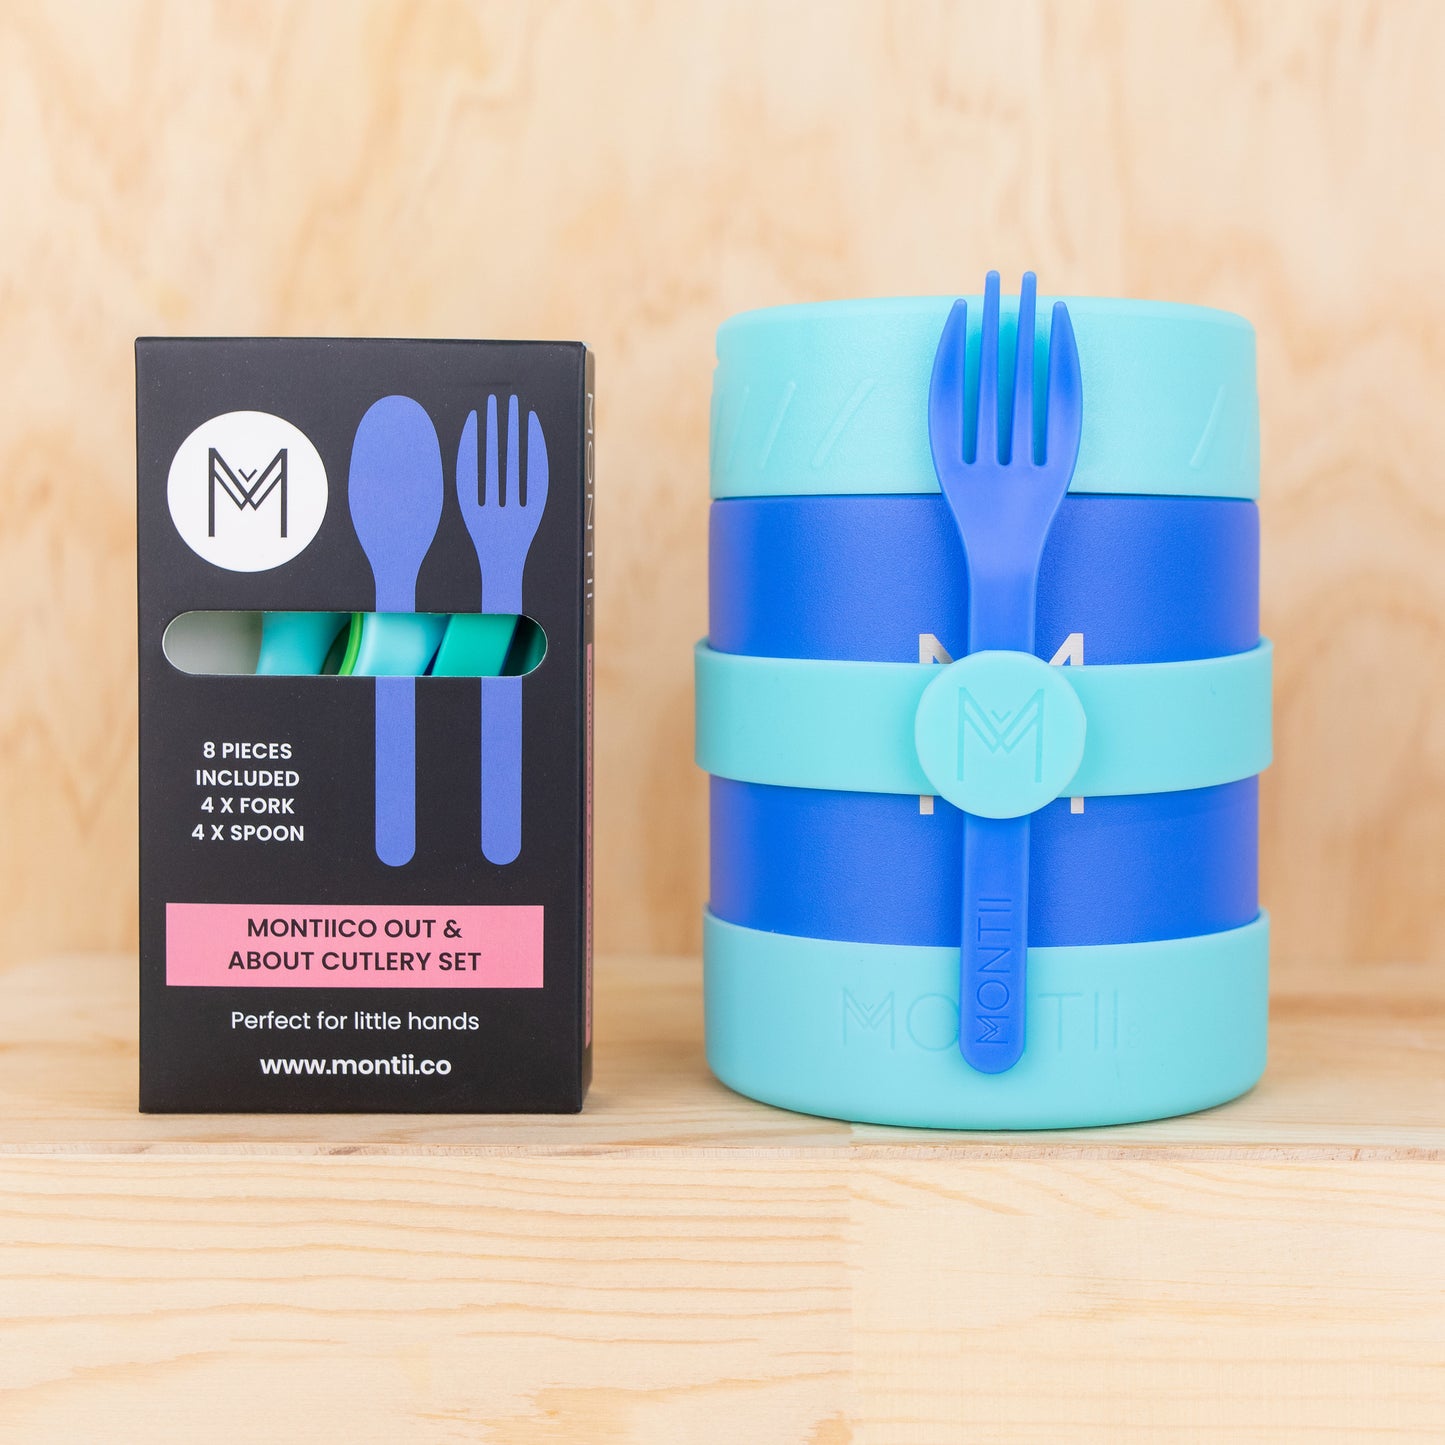 MontiiCo Out & About Cutlery Set - Blueberry